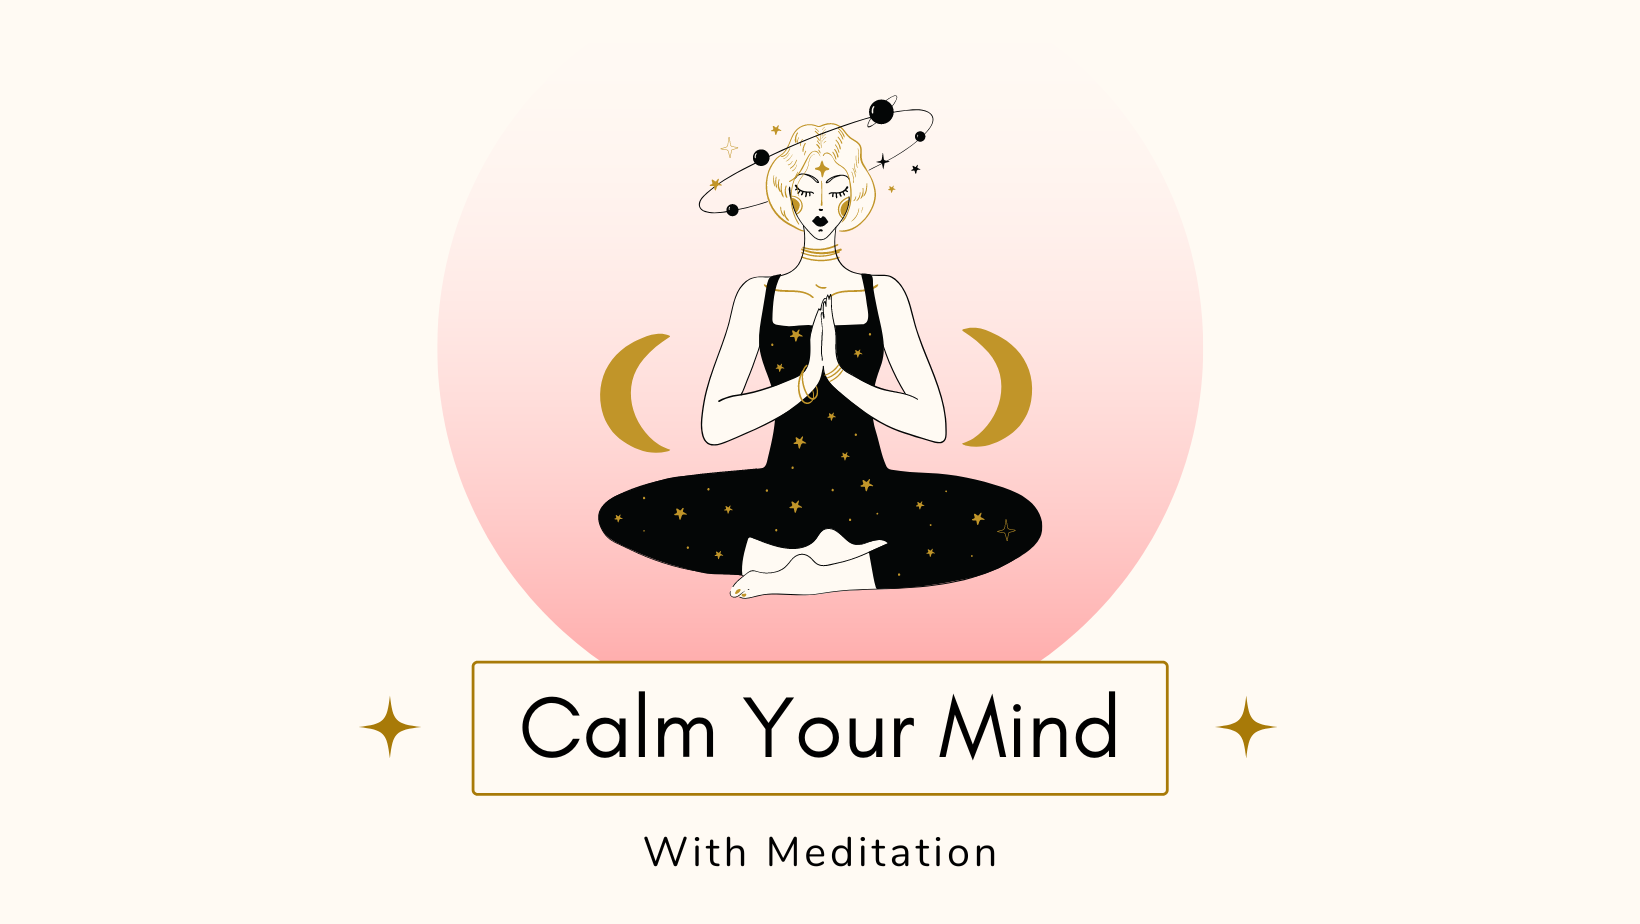 Meditation – Why bother?